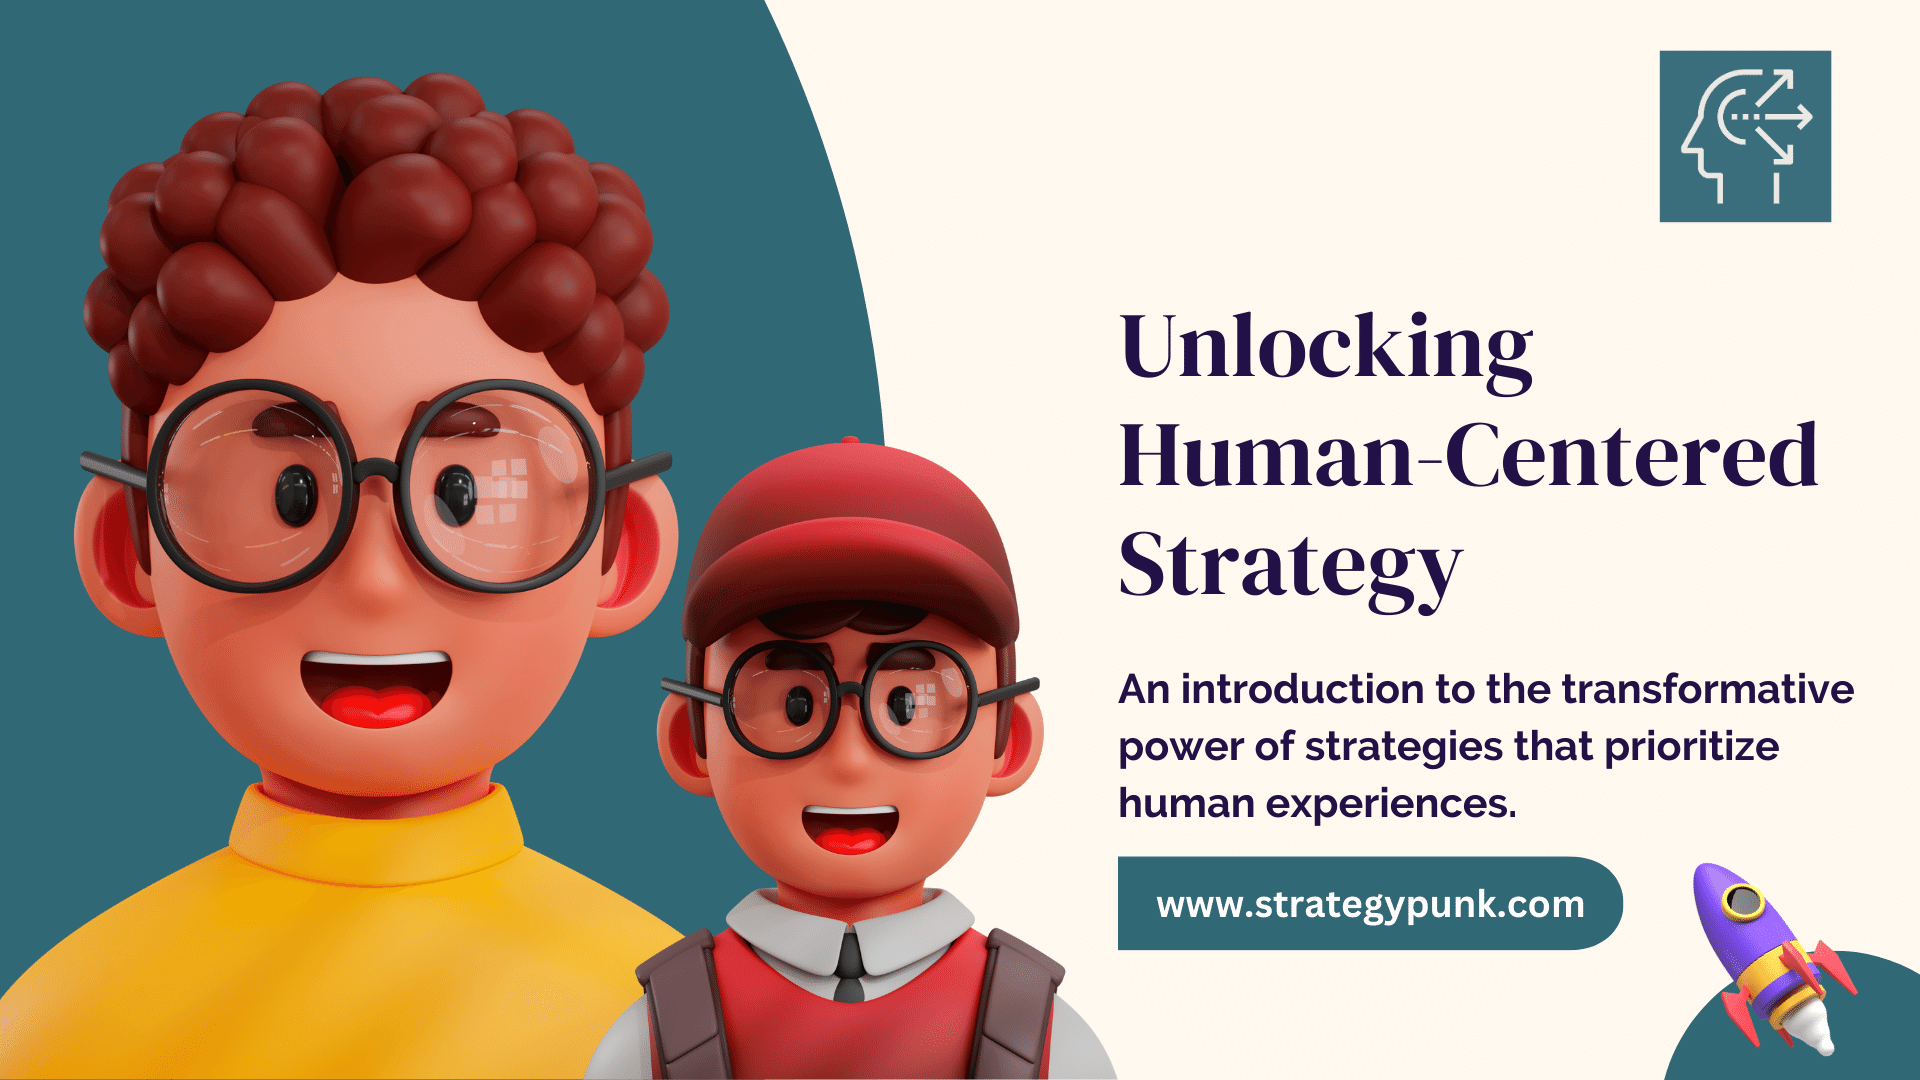 Crafting a Human-Centered Strategy: A Modern Human-Centered Design of Organizations